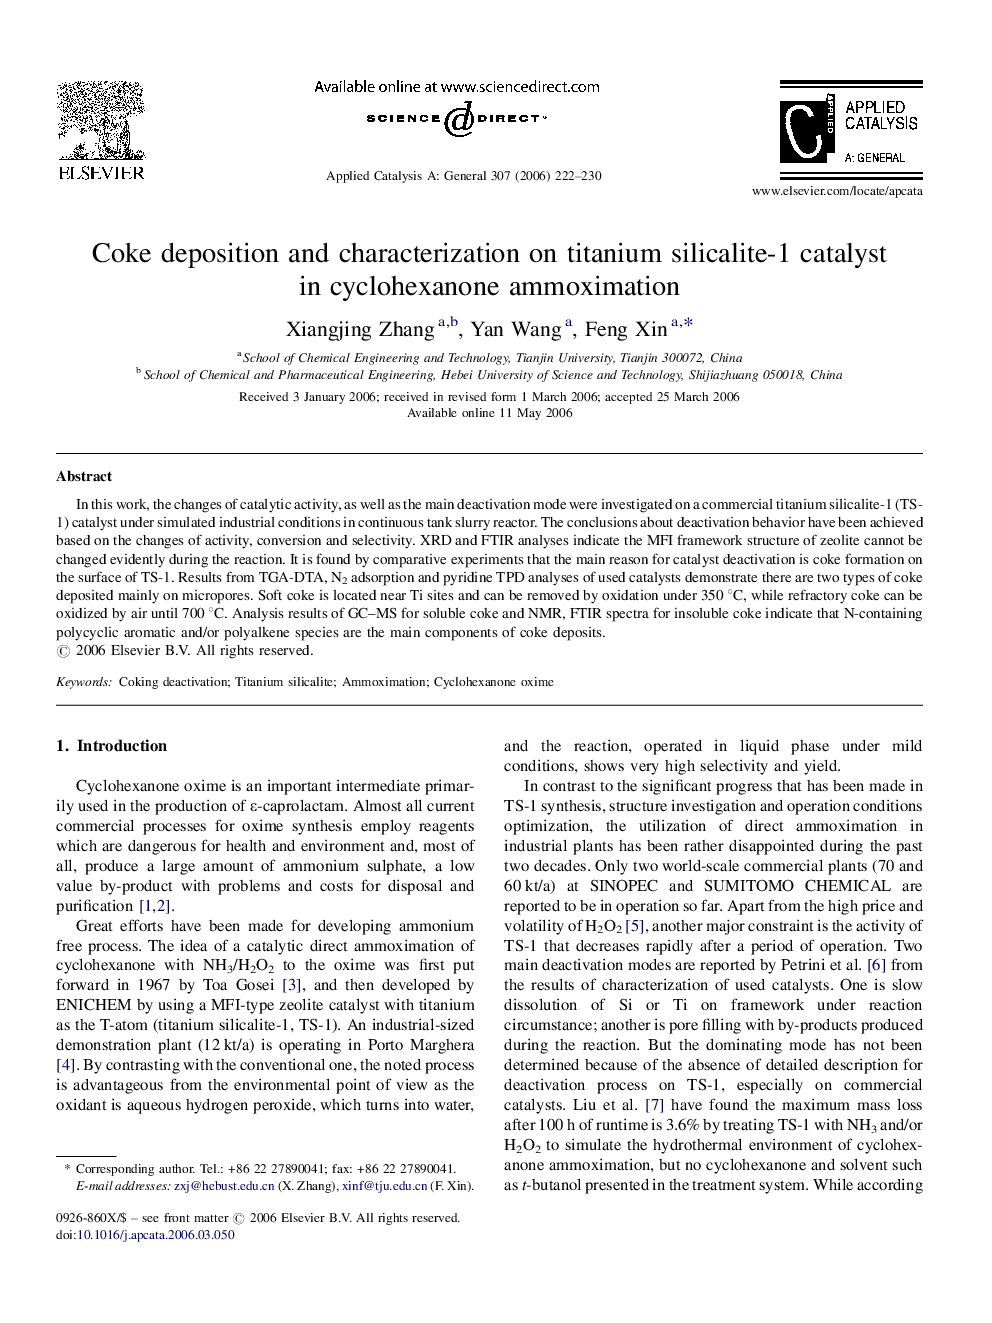 Coke deposition and characterization on titanium silicalite-1 catalyst in cyclohexanone ammoximation